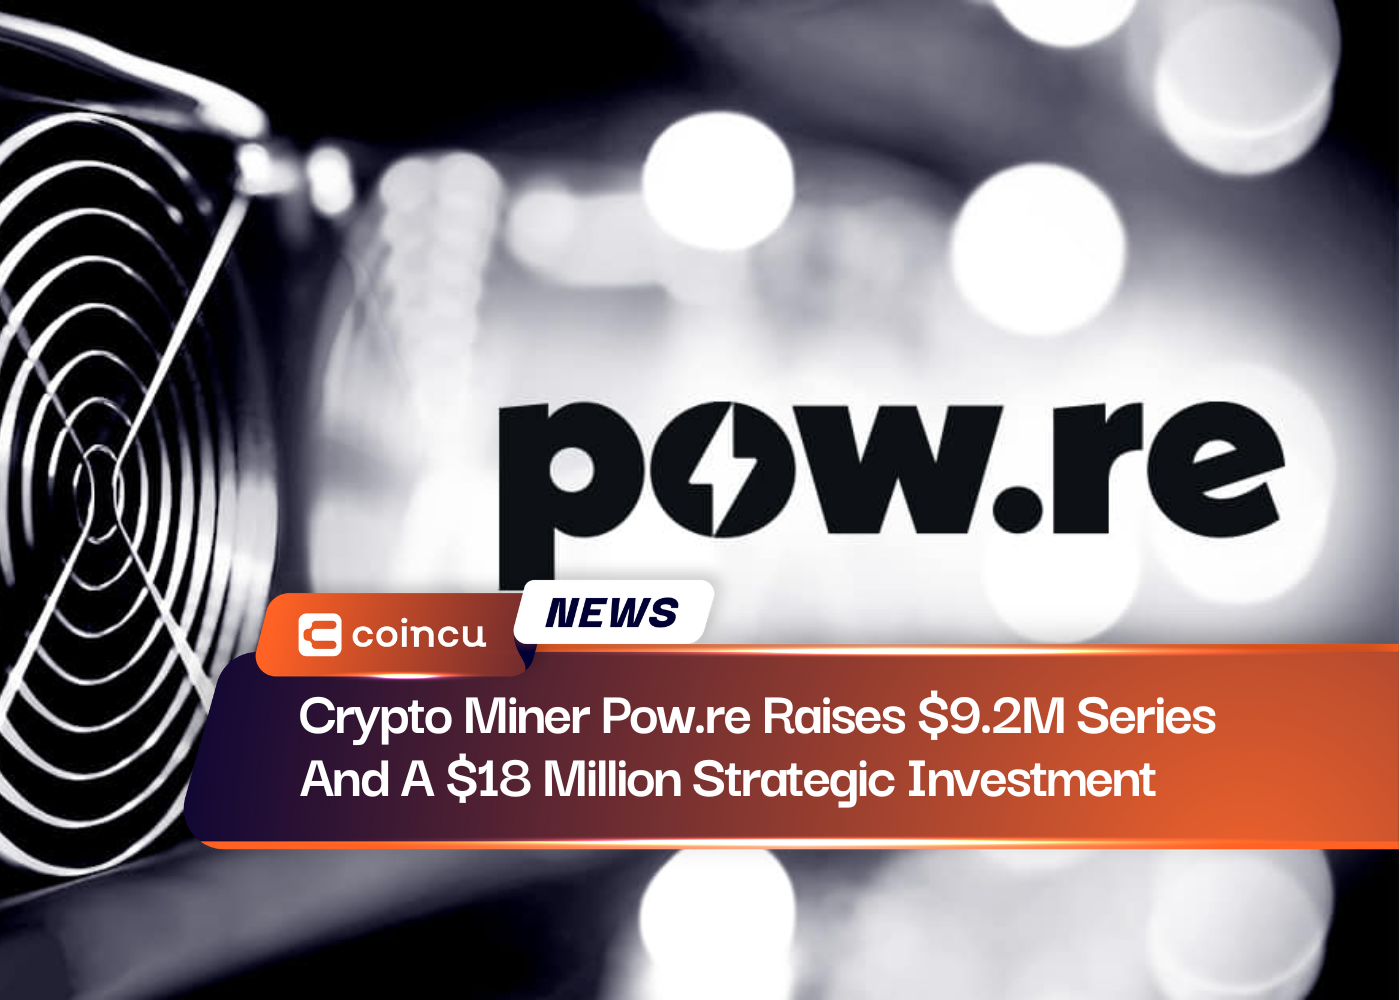 Crypto Miner Pow.re Raises $9.2M Series And A $18 Million Strategic Investment